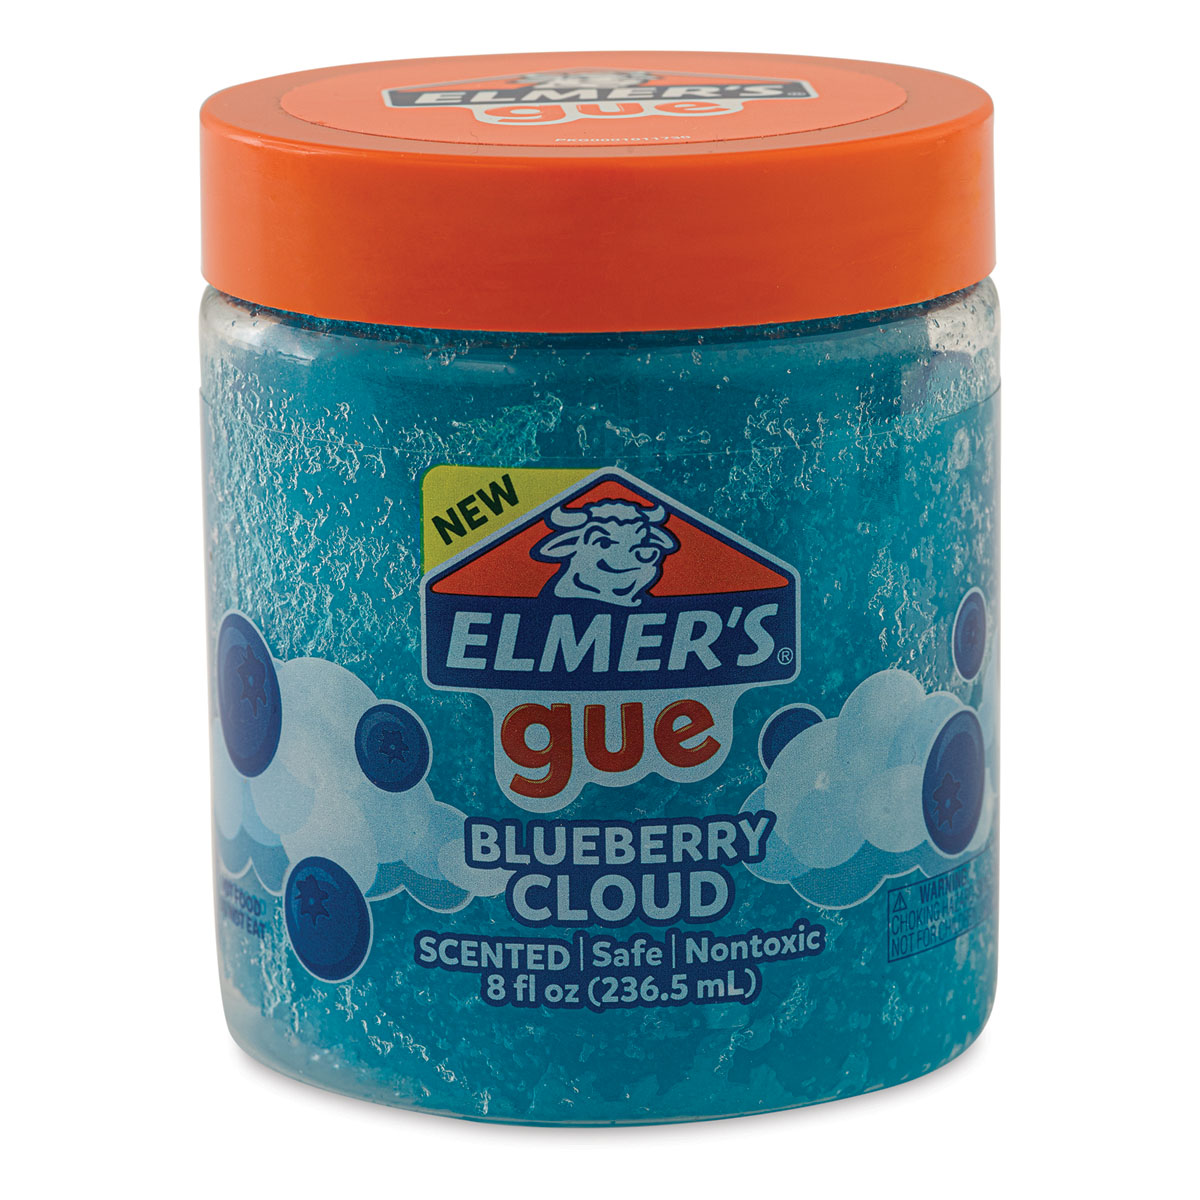 Elmer's 2110577-XCP2 Slime Gue Blueberry Cloud Blue - pack of 2